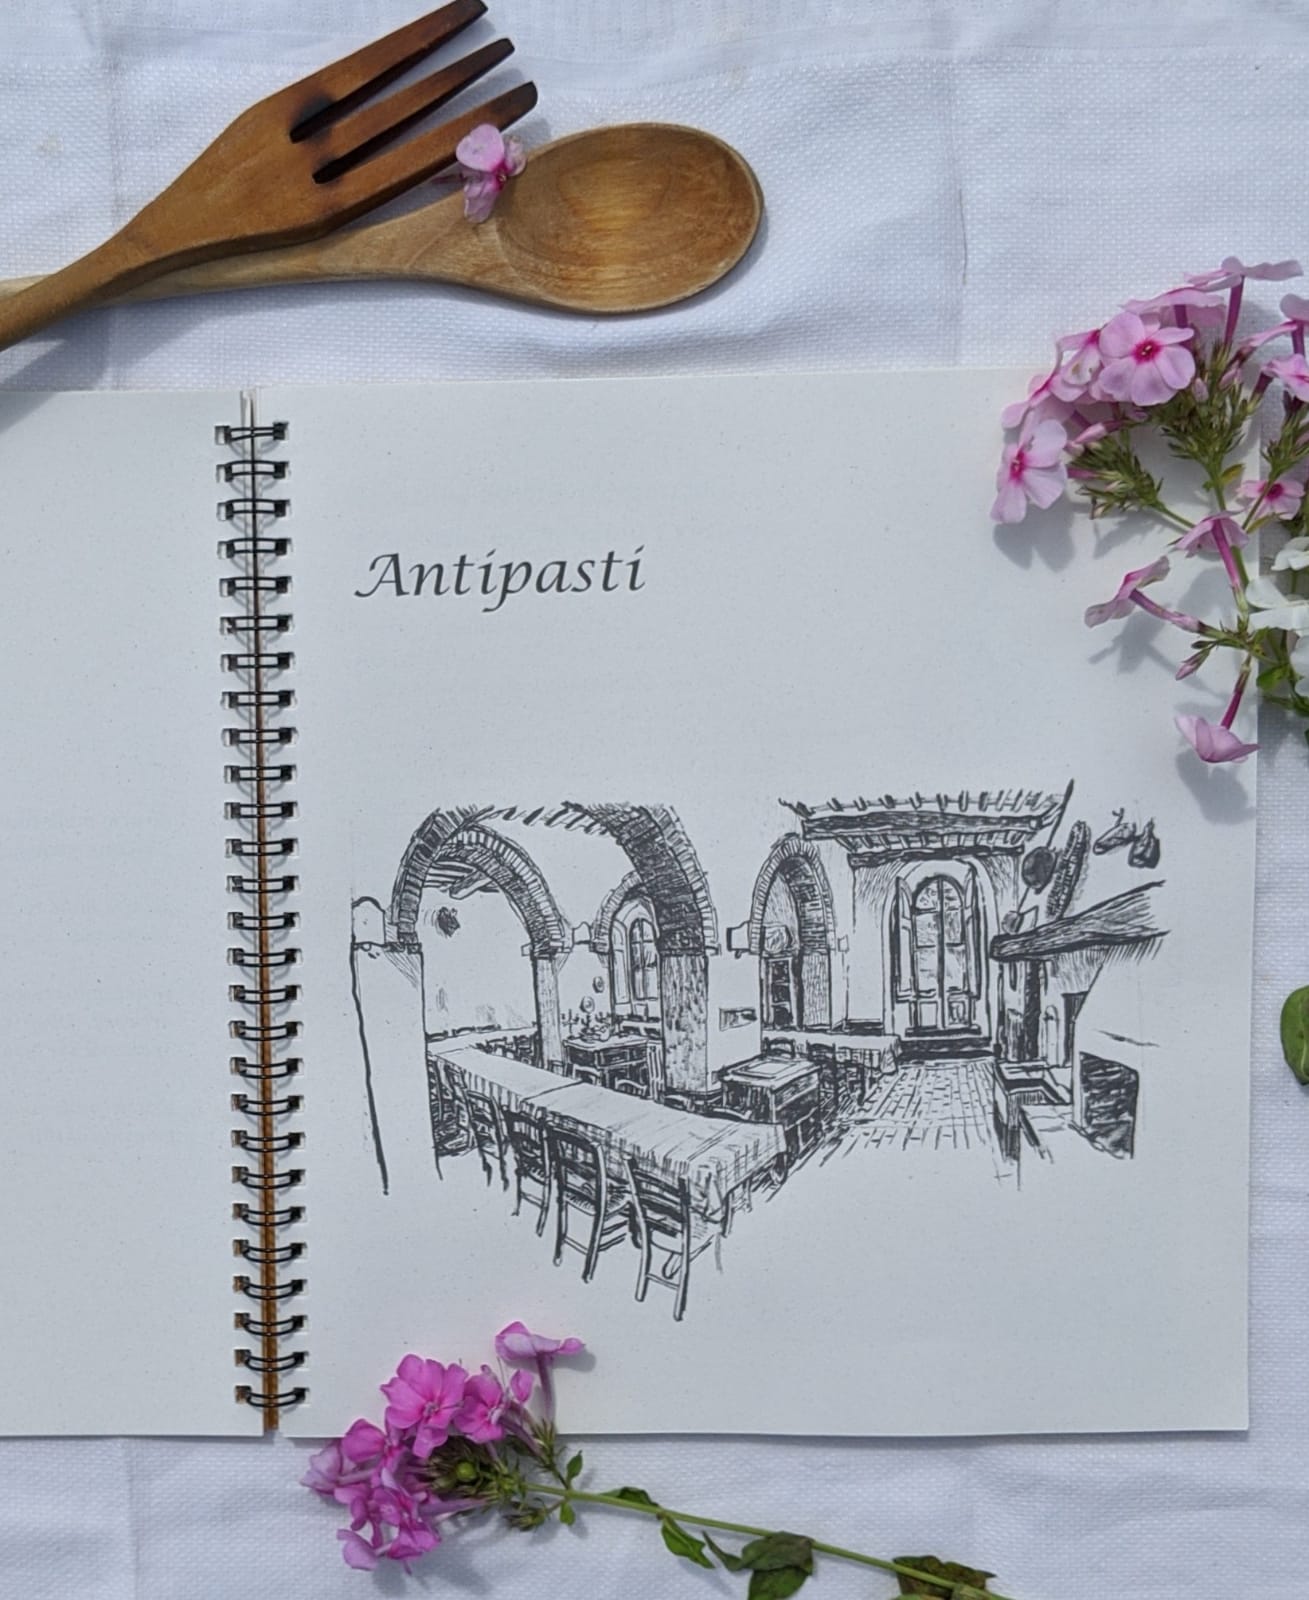 Open book showing the "Antipasti" page